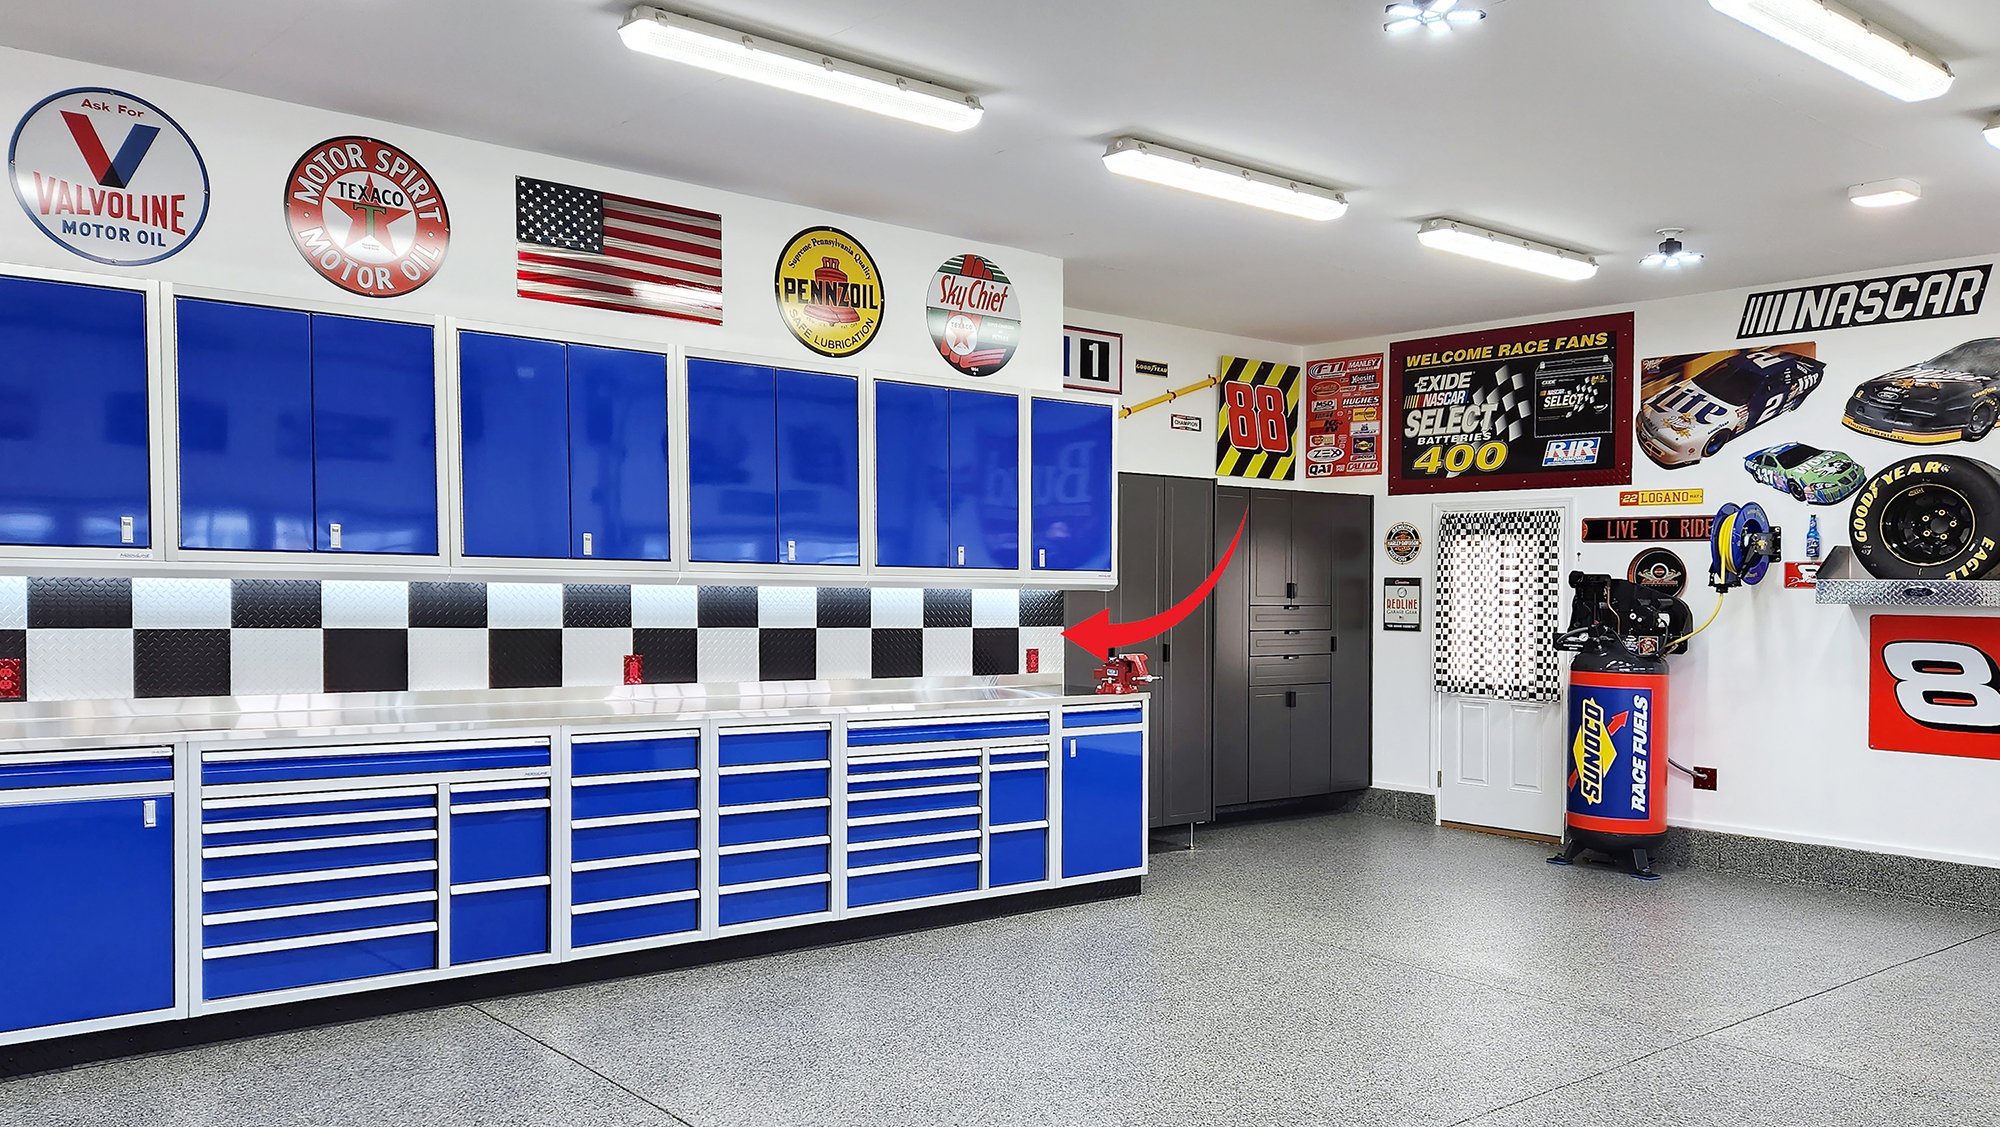 MaxTile wainscoting used in a race care themed garage